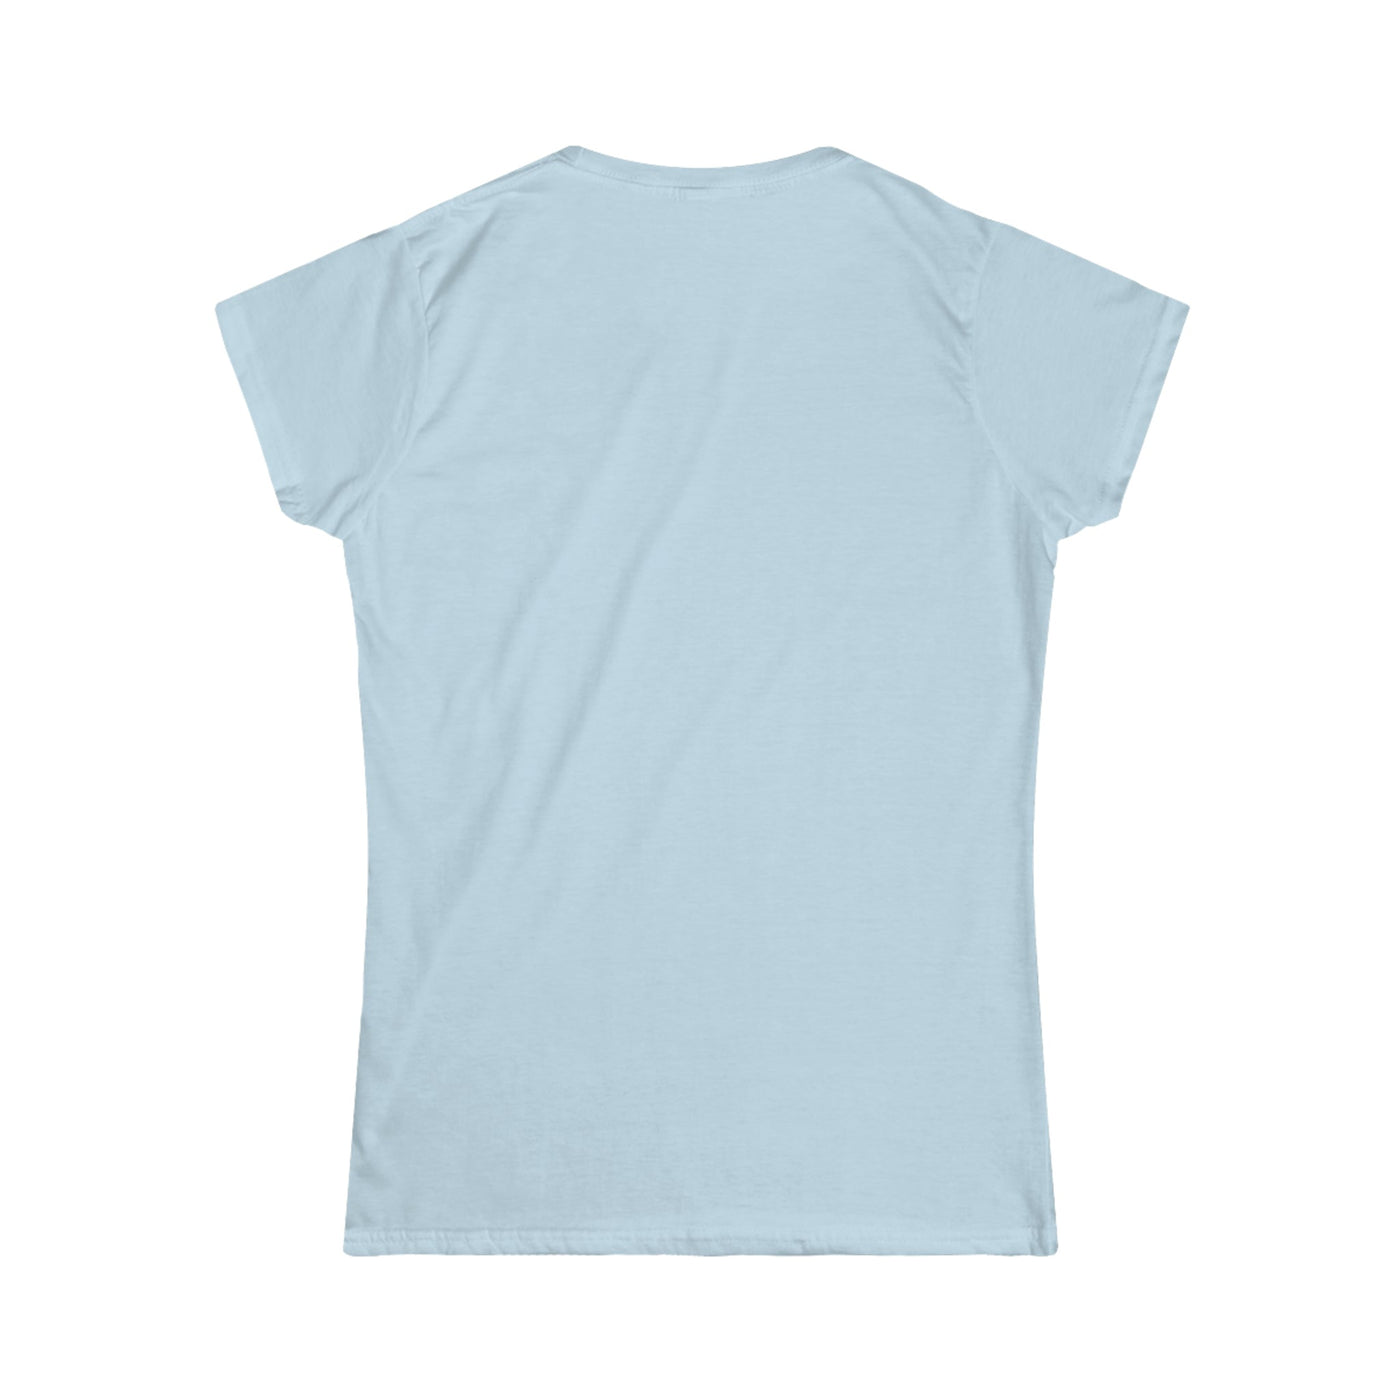 Defeated Queen 22 Women's Softstyle White T-Shirt - Ozzell London